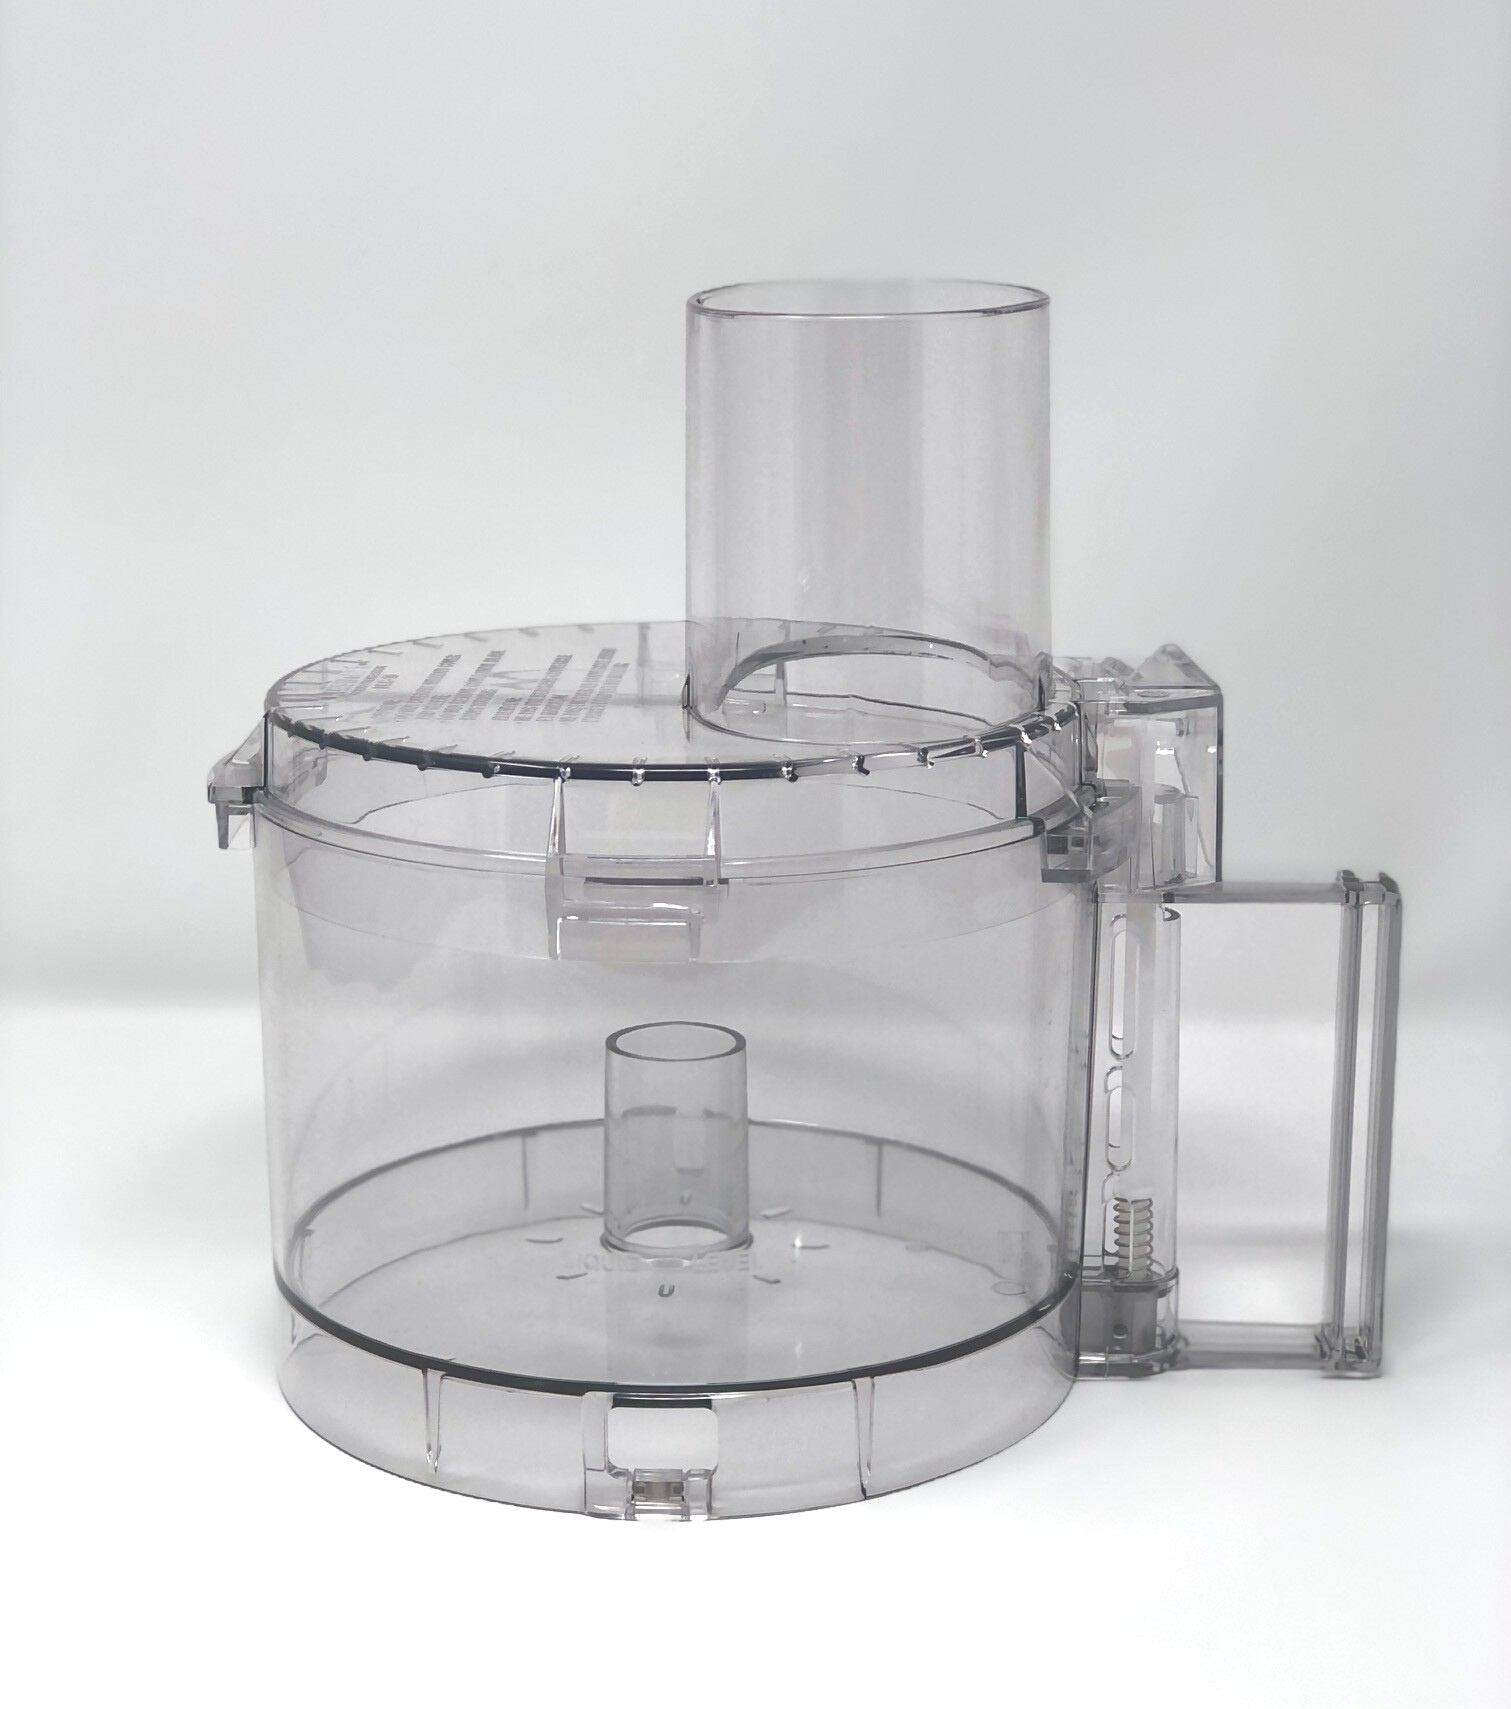 Cuisinart Food Processor Work Bowl for Tritan, DLC-2011, DLC-2011WBNT1-1  (replacement bowl only)